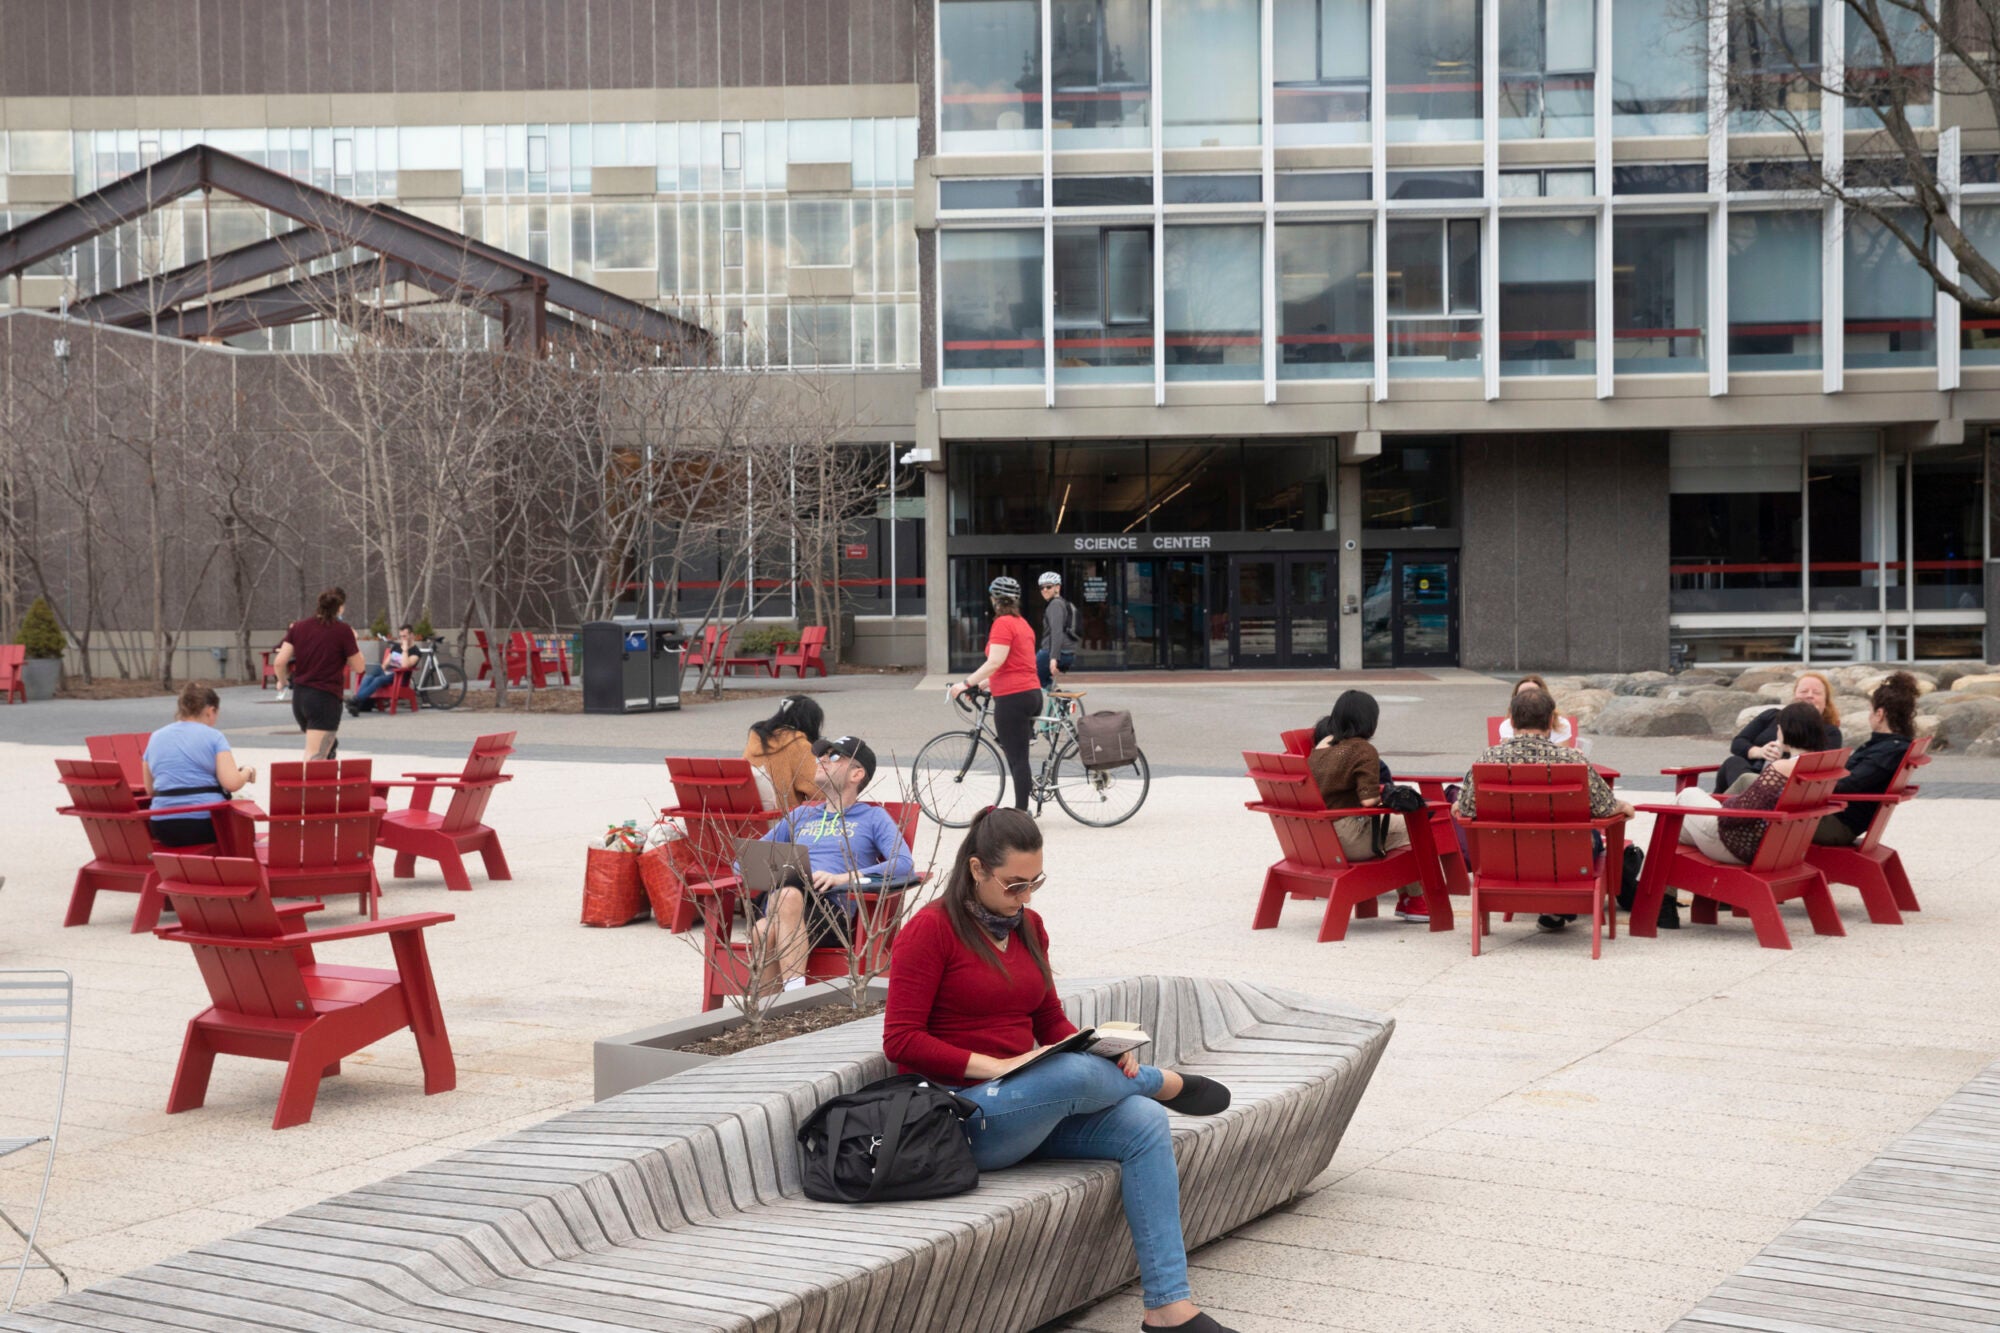 People sit on benches and in chairs on a plaza with a building behind them